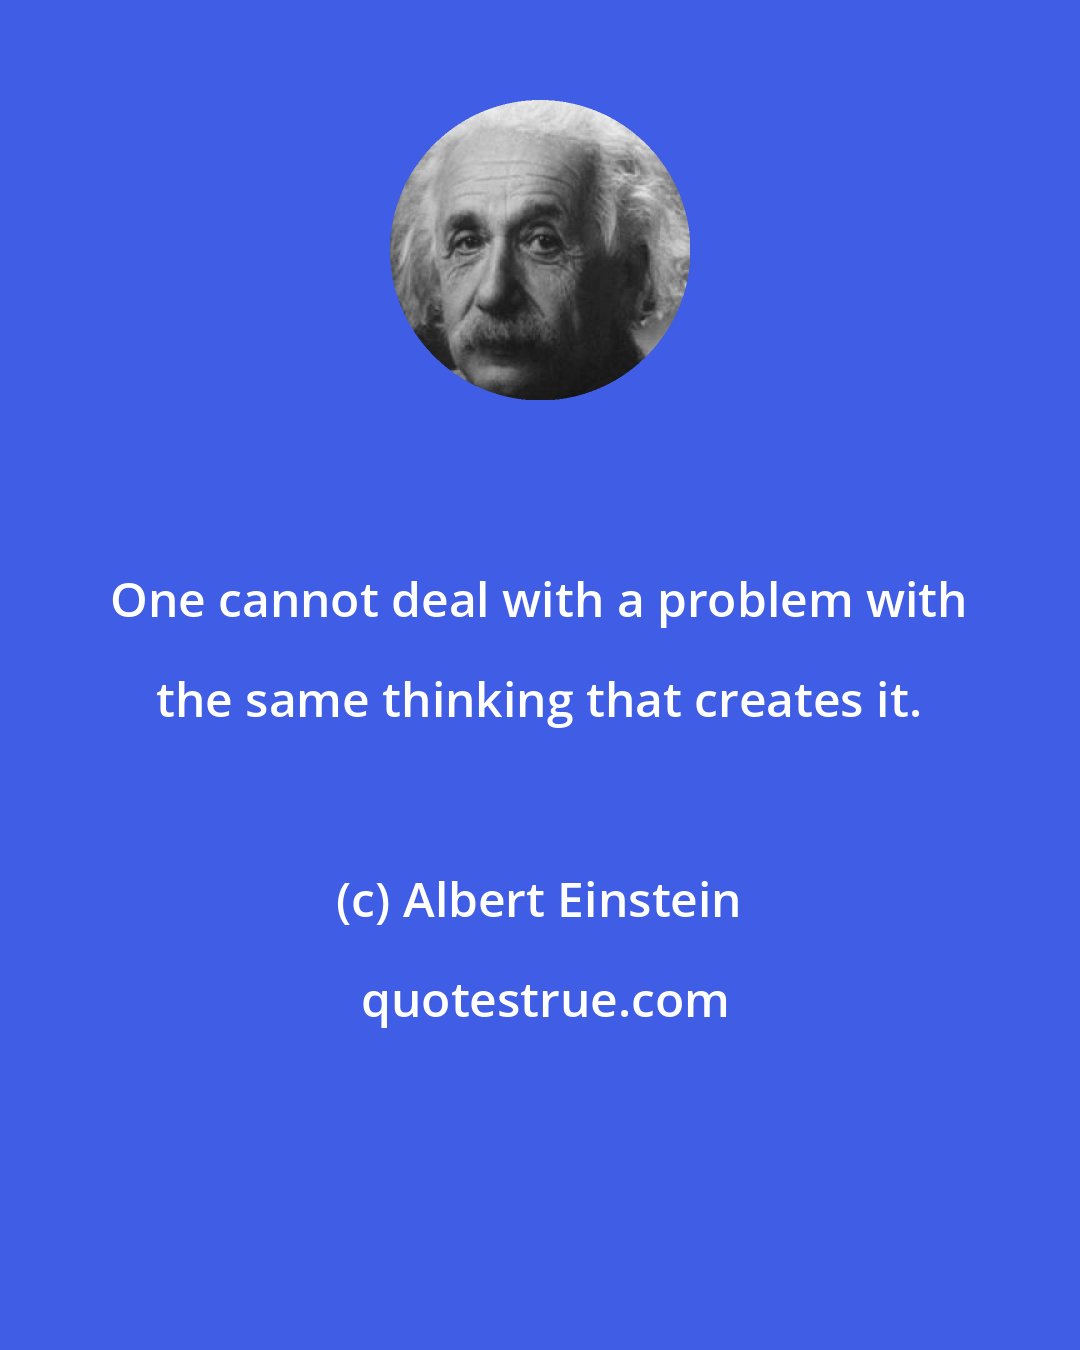 Albert Einstein: One cannot deal with a problem with the same thinking that creates it.